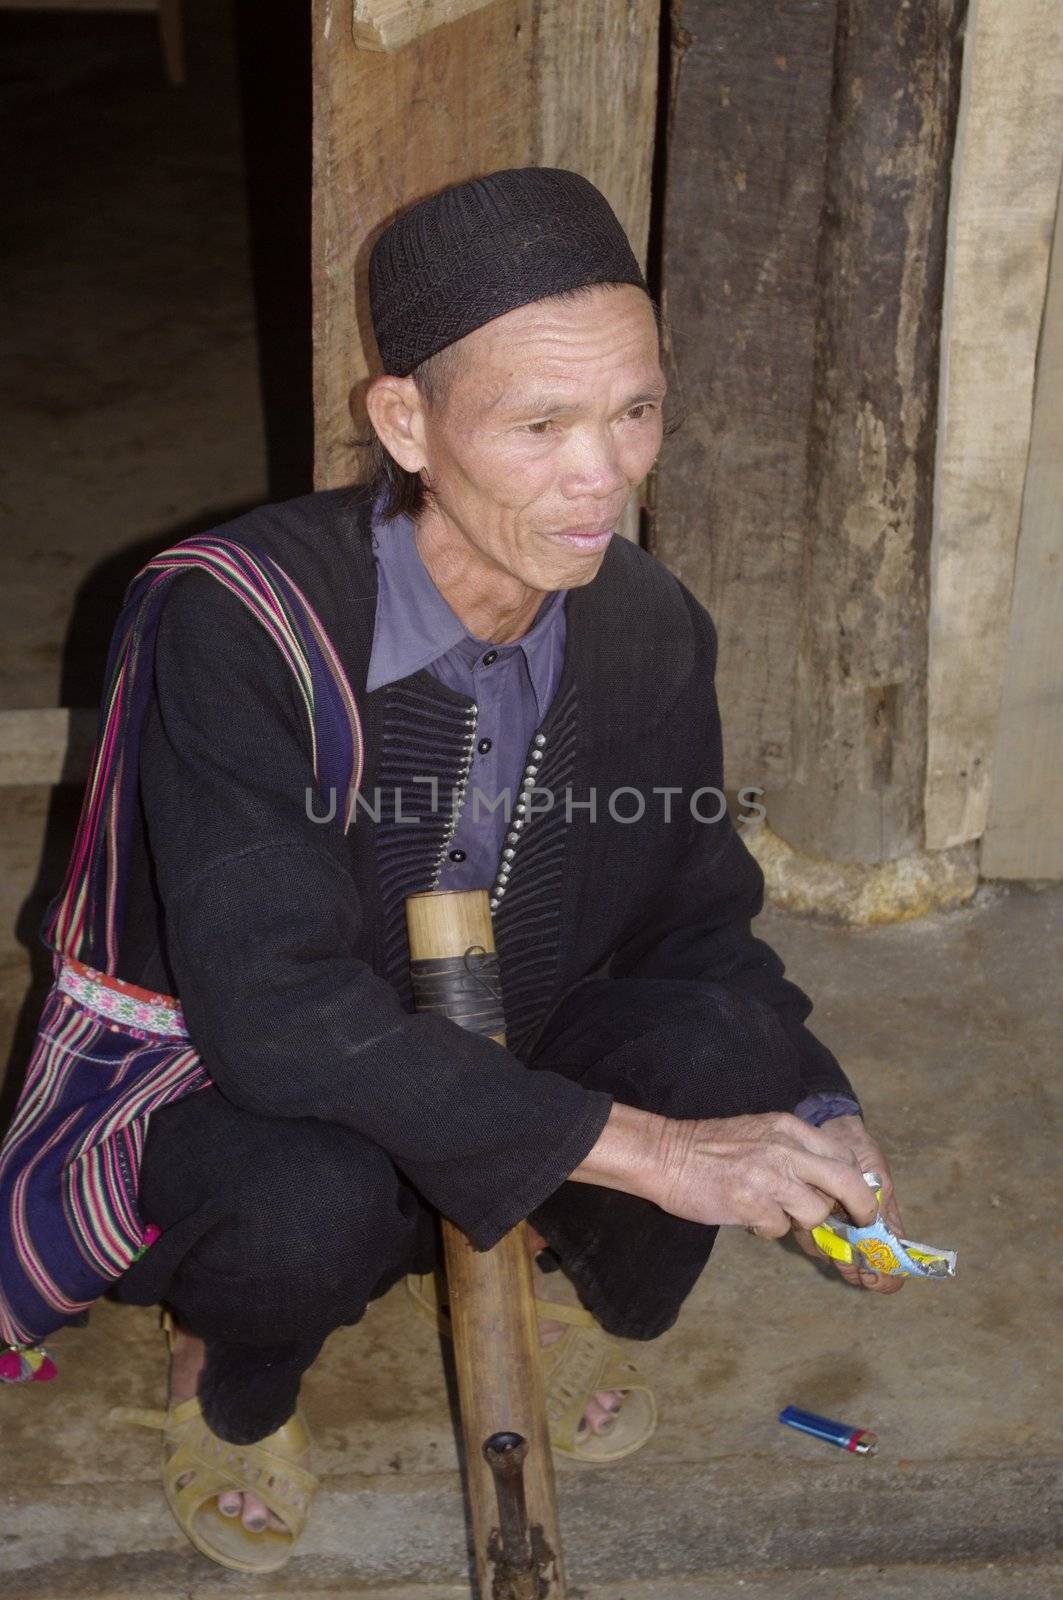 This man belongs to the Dao ethnic black. It is still one of the few to have retained the traditional dress.